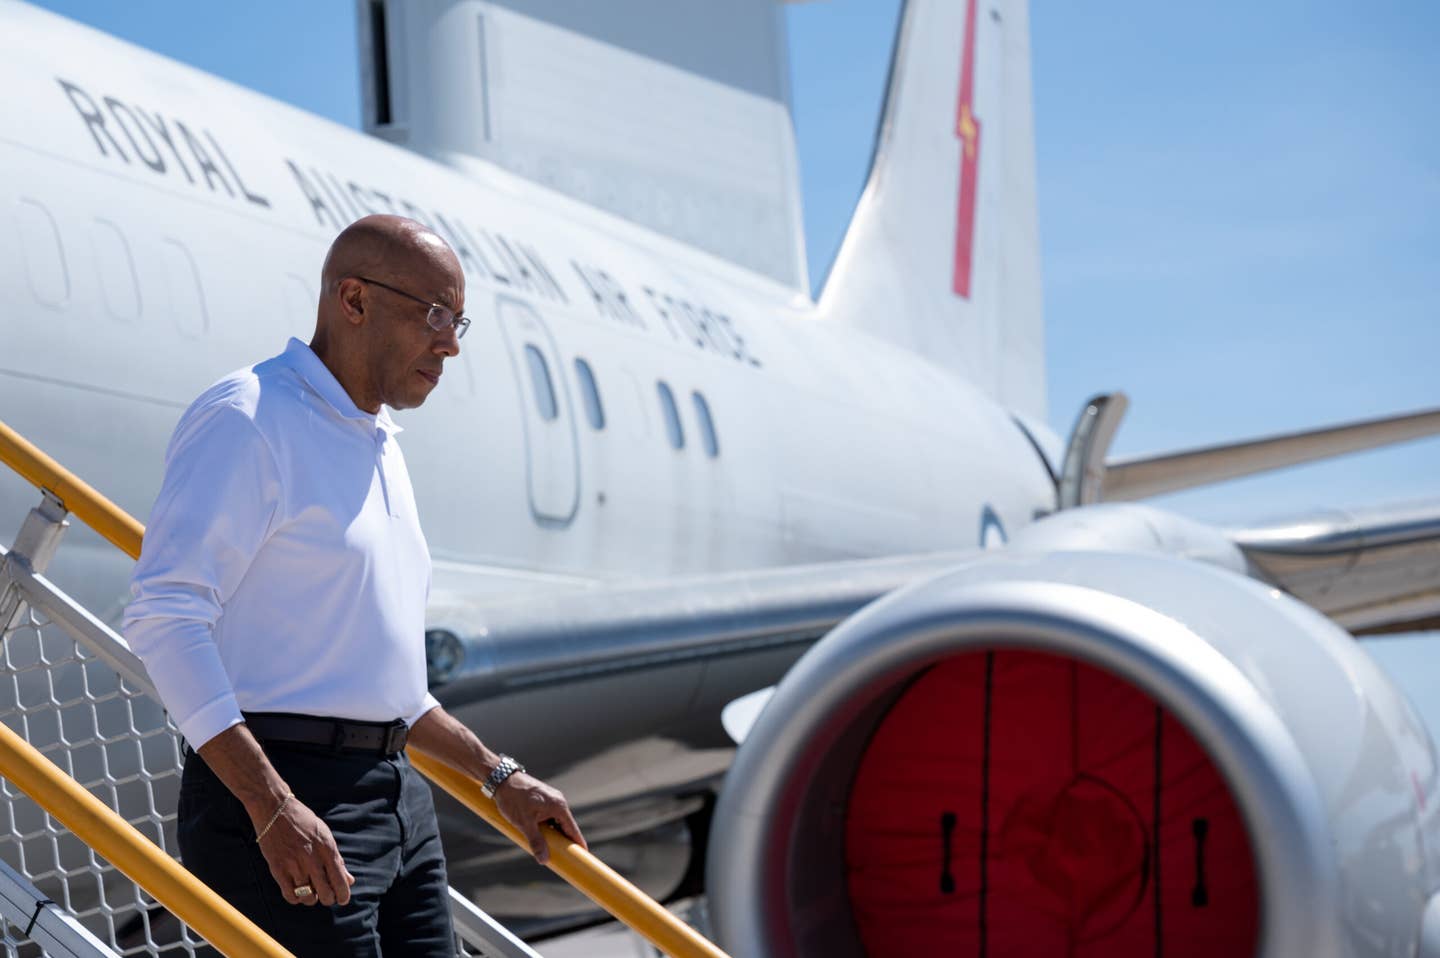 Air Force Chief of Staff Gen. Charles Q. Brown, Jr. tours a Royal Australian Air Force E-7A Wedgetail at Nellis Air Force Base, Nevada, May 6, 2022. <em>U.S. Air Force photo by Airman 1st Class Josey Blades</em>